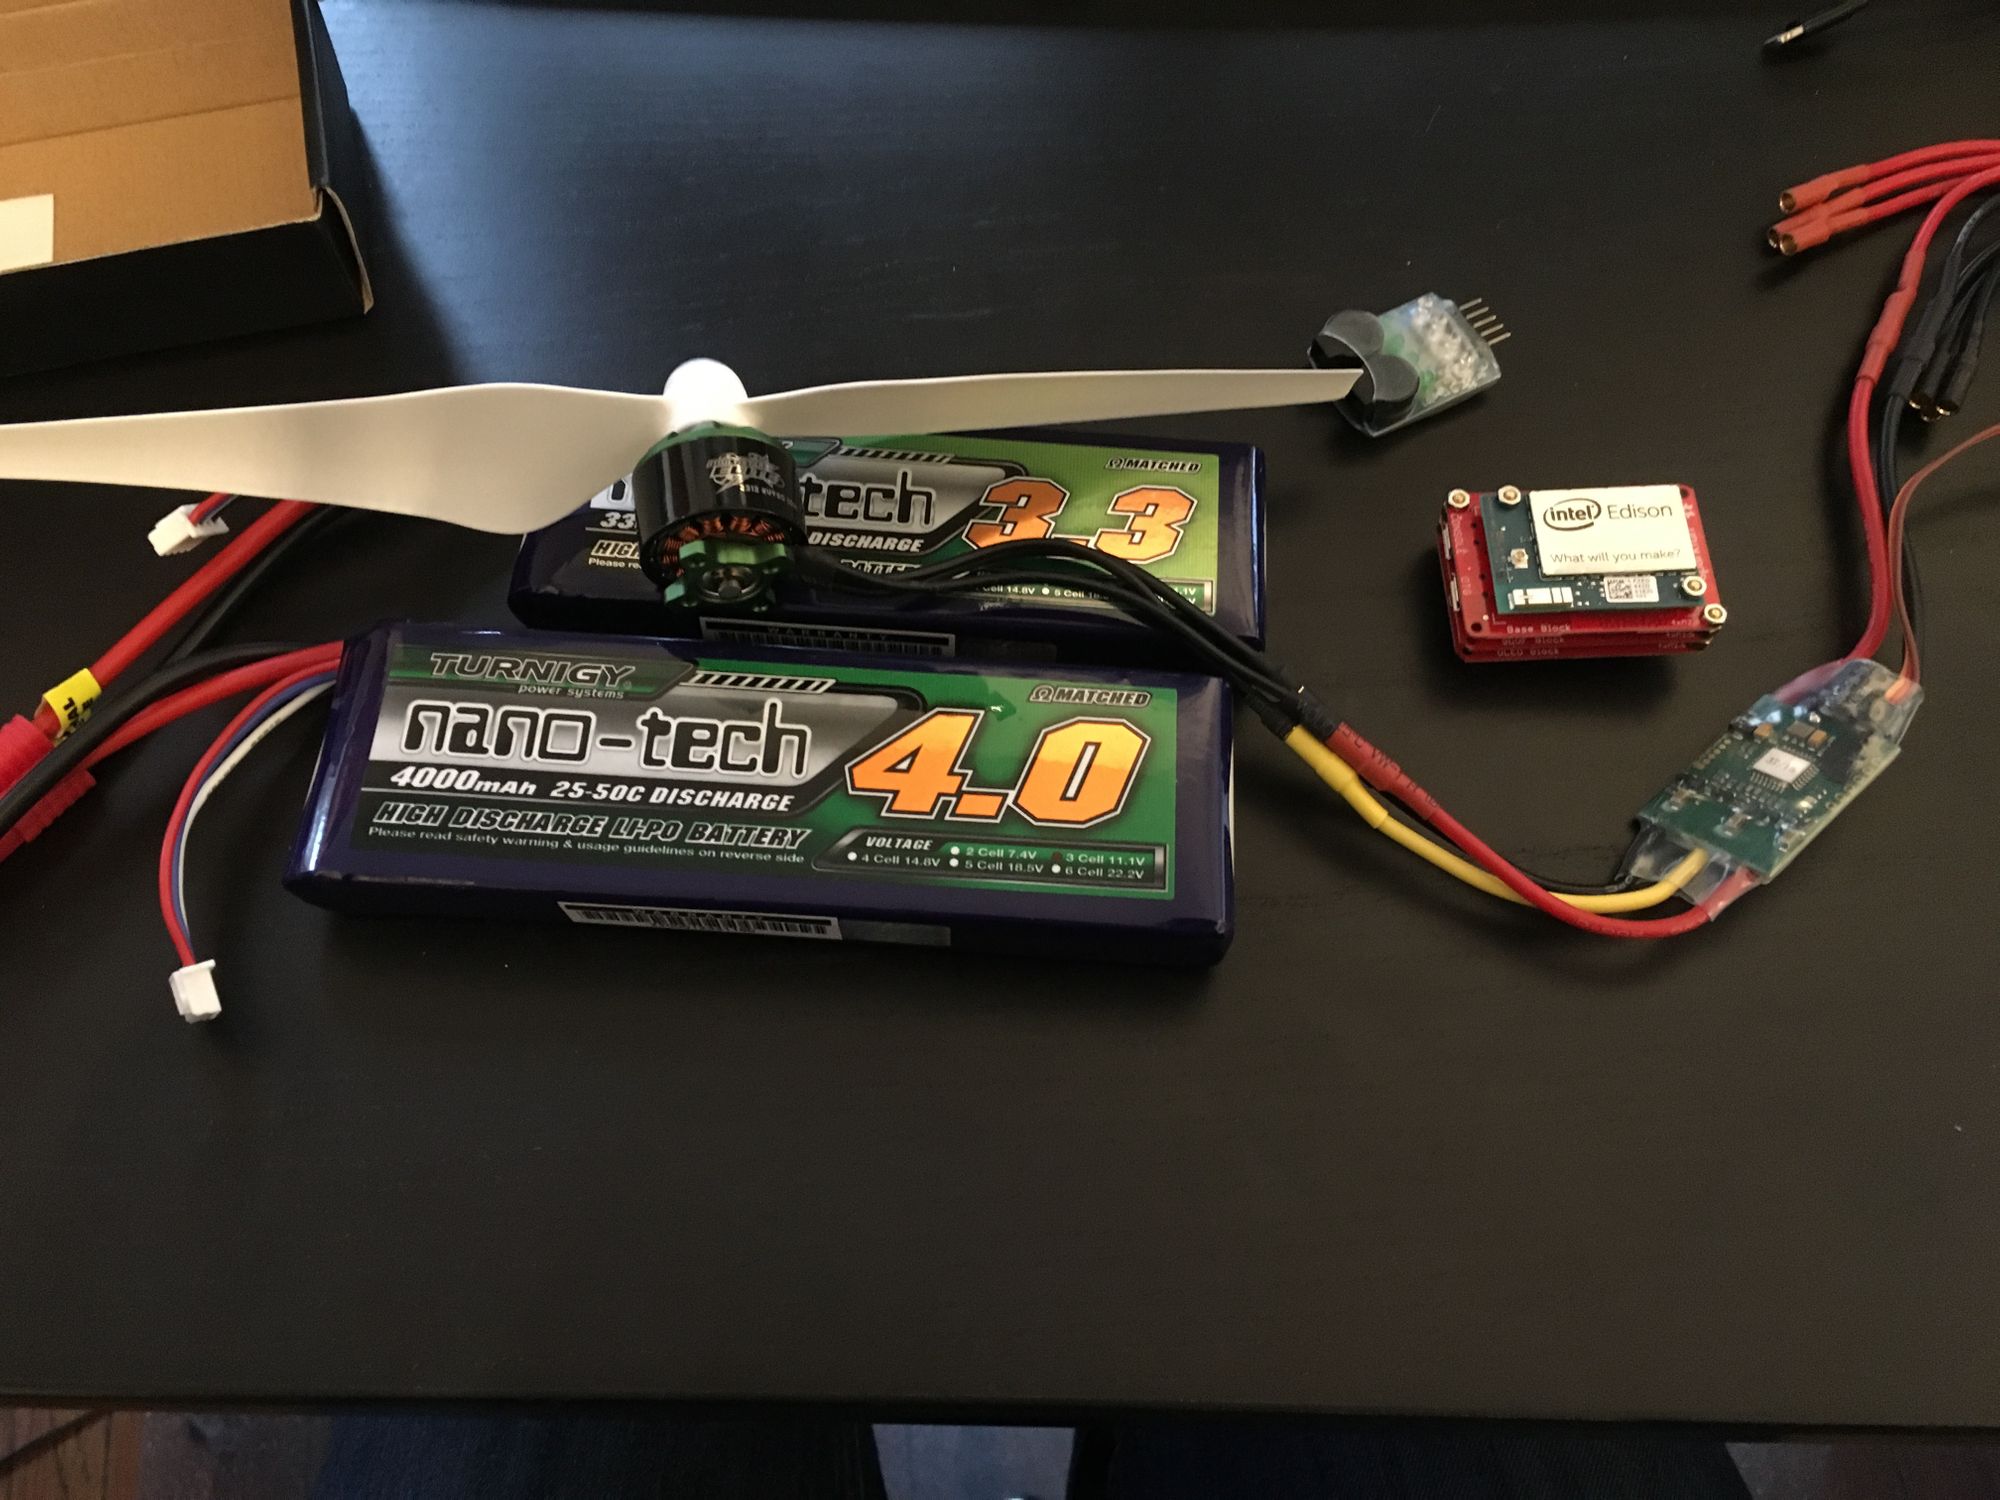 Building a Quadcopter - Part 1: General idea and selecting parts